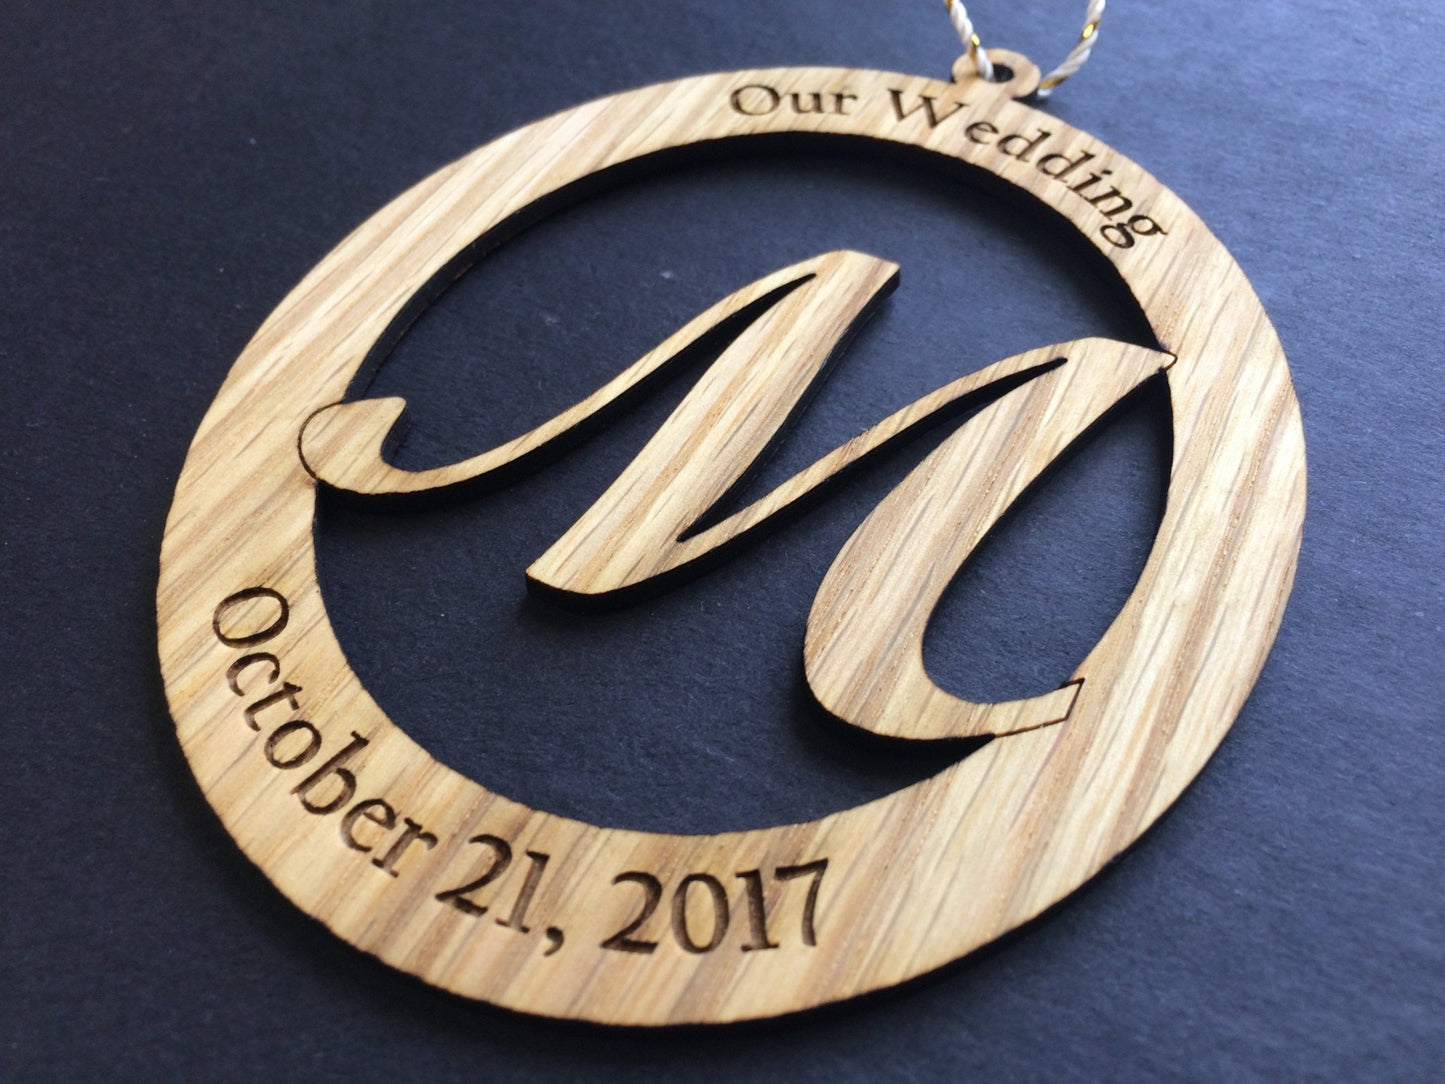 Our Wedding Ornament - Our Wedding Ornament, Ornament, home decor, laser engraved - Legacy Images - Legacy Images - Holiday Ornaments